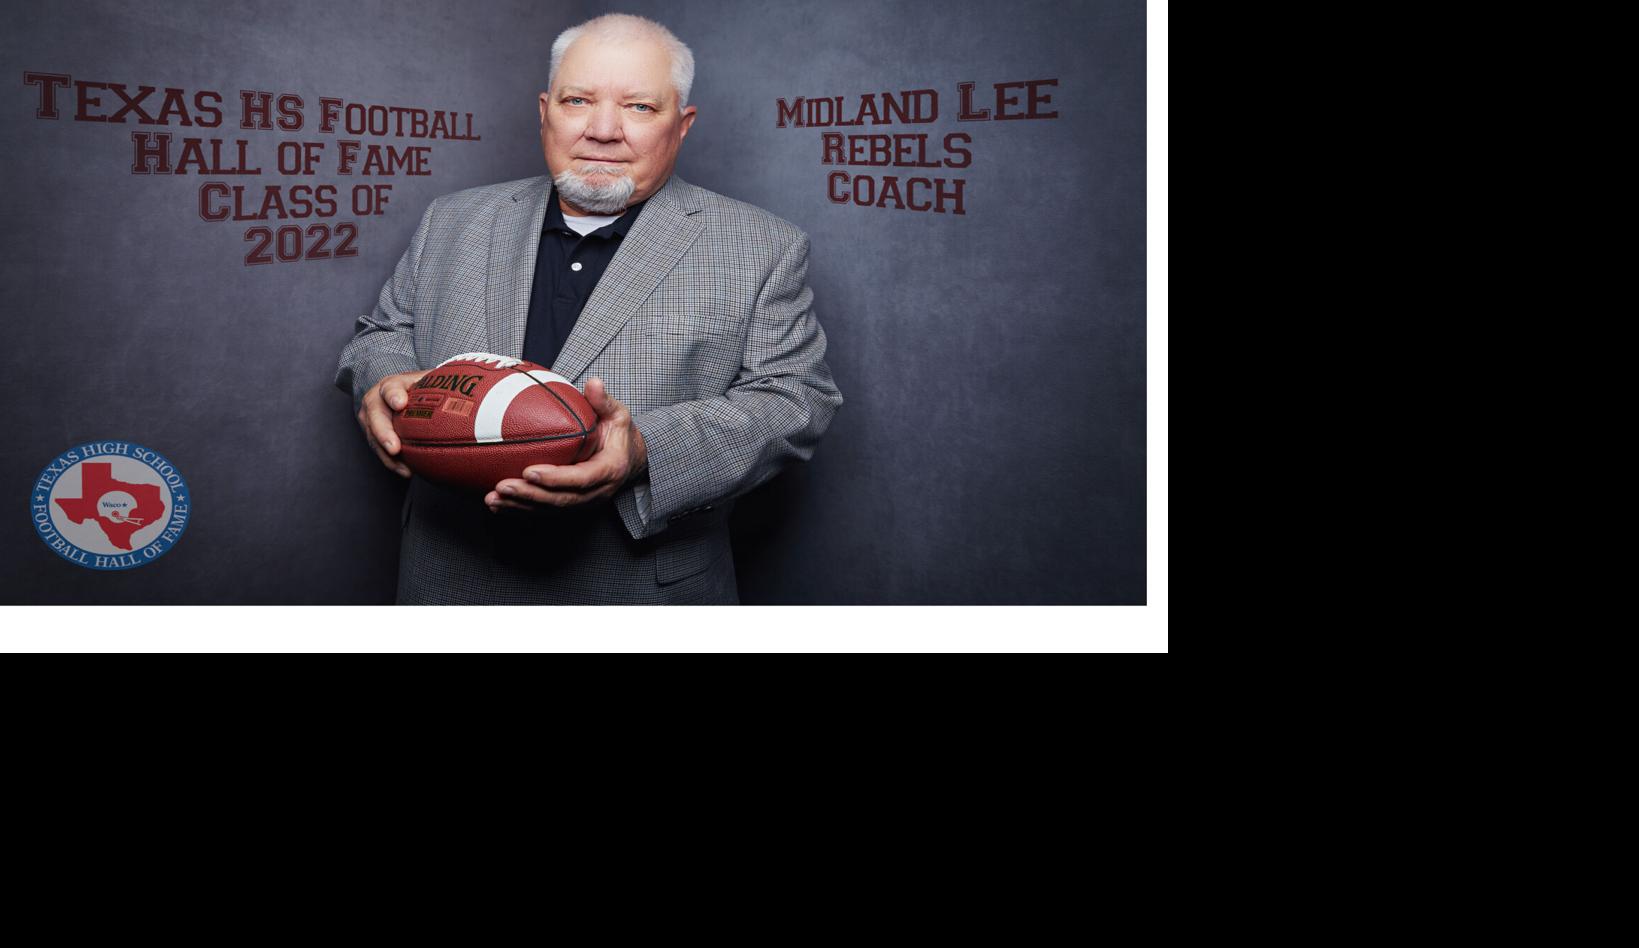 Texas High School Football Hall of Fame: John Parchman gave Rebels  something to yell about at Midland Lee